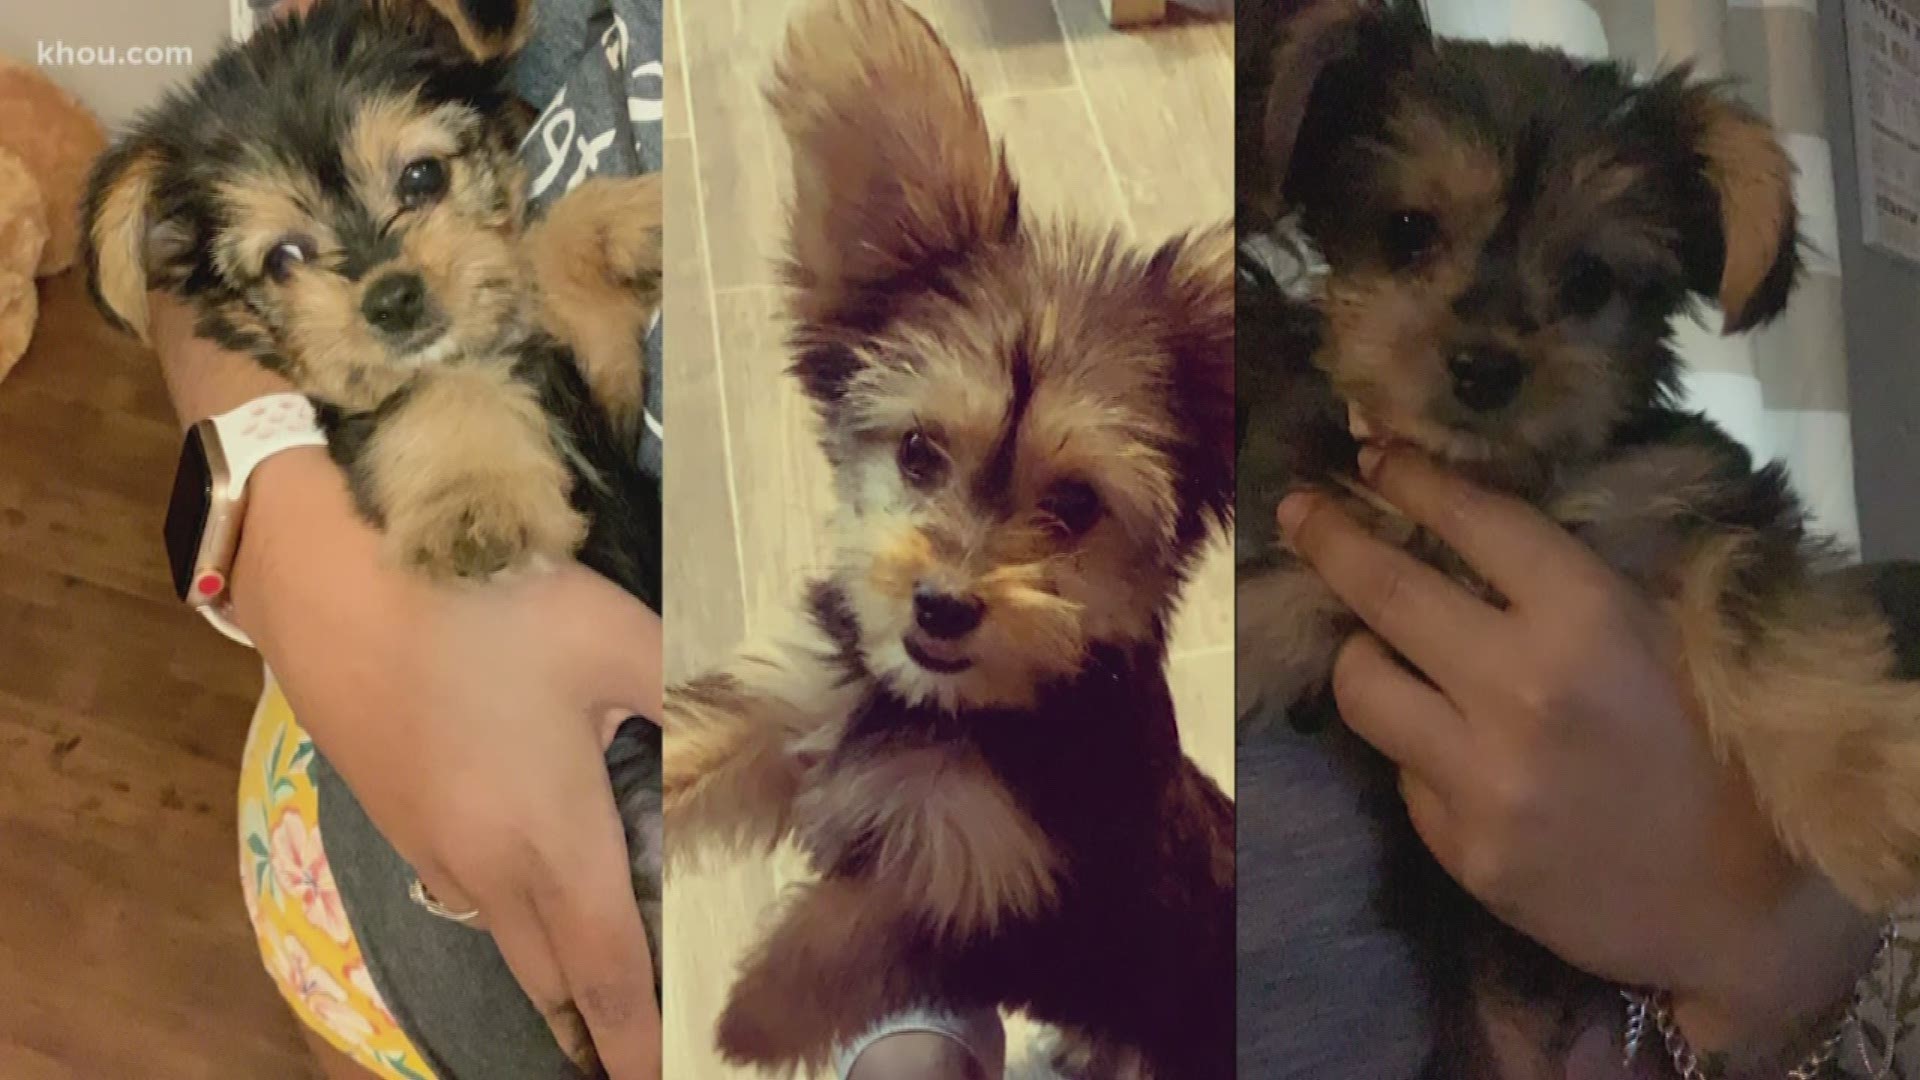 A family in Dickinson is devastated after a neighbor's dog attacked and killed their Yorkie.